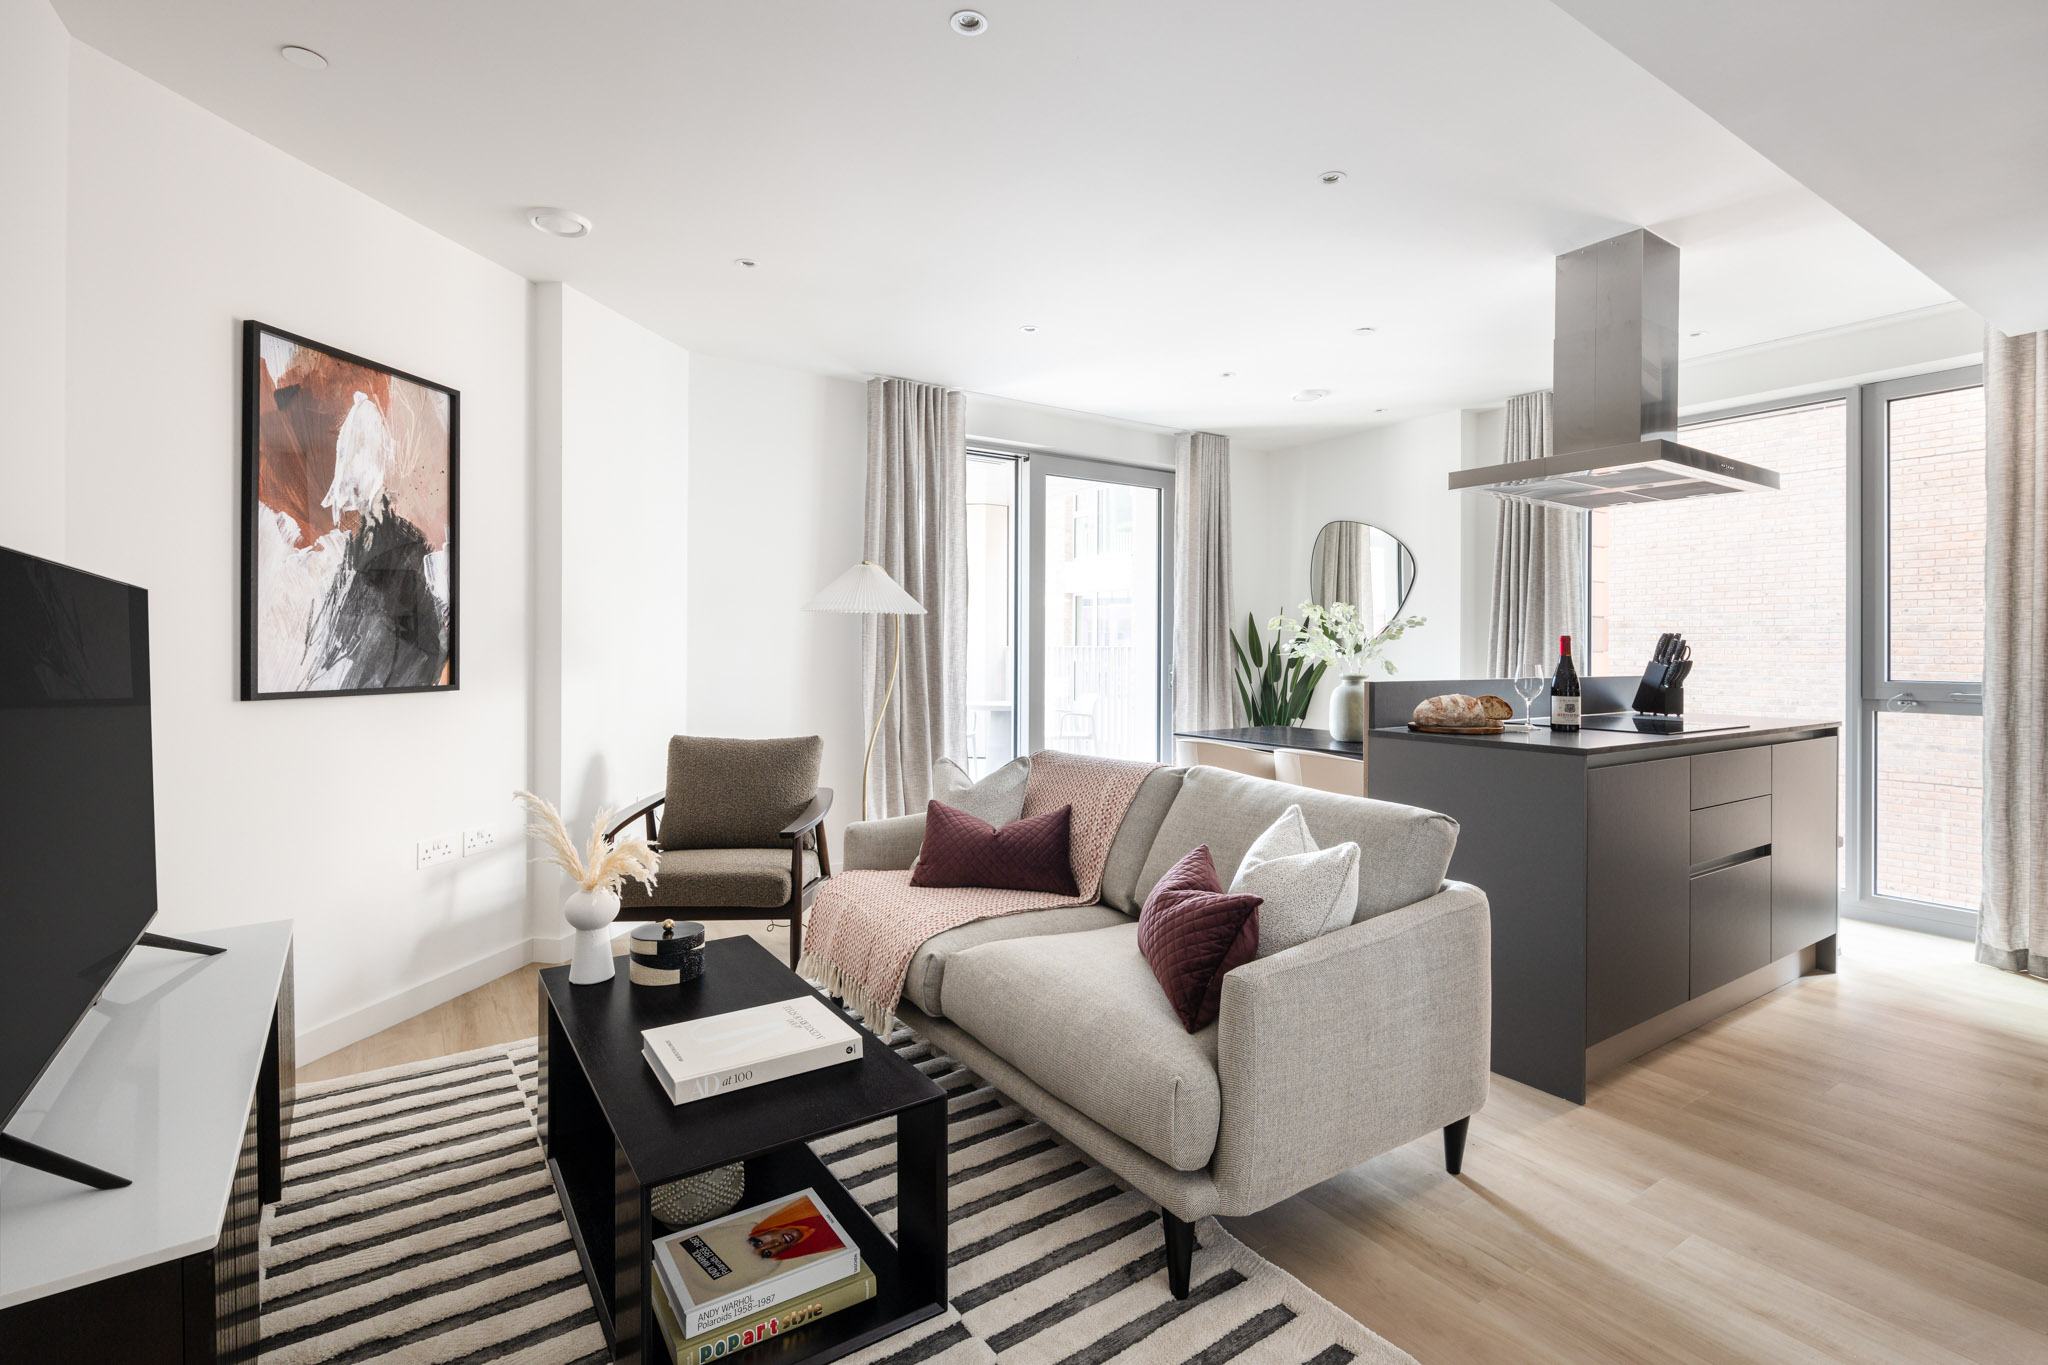 Living Room - Two Bedroom Apartment - Urban rest Battersea Apartments - London - Urban Rest